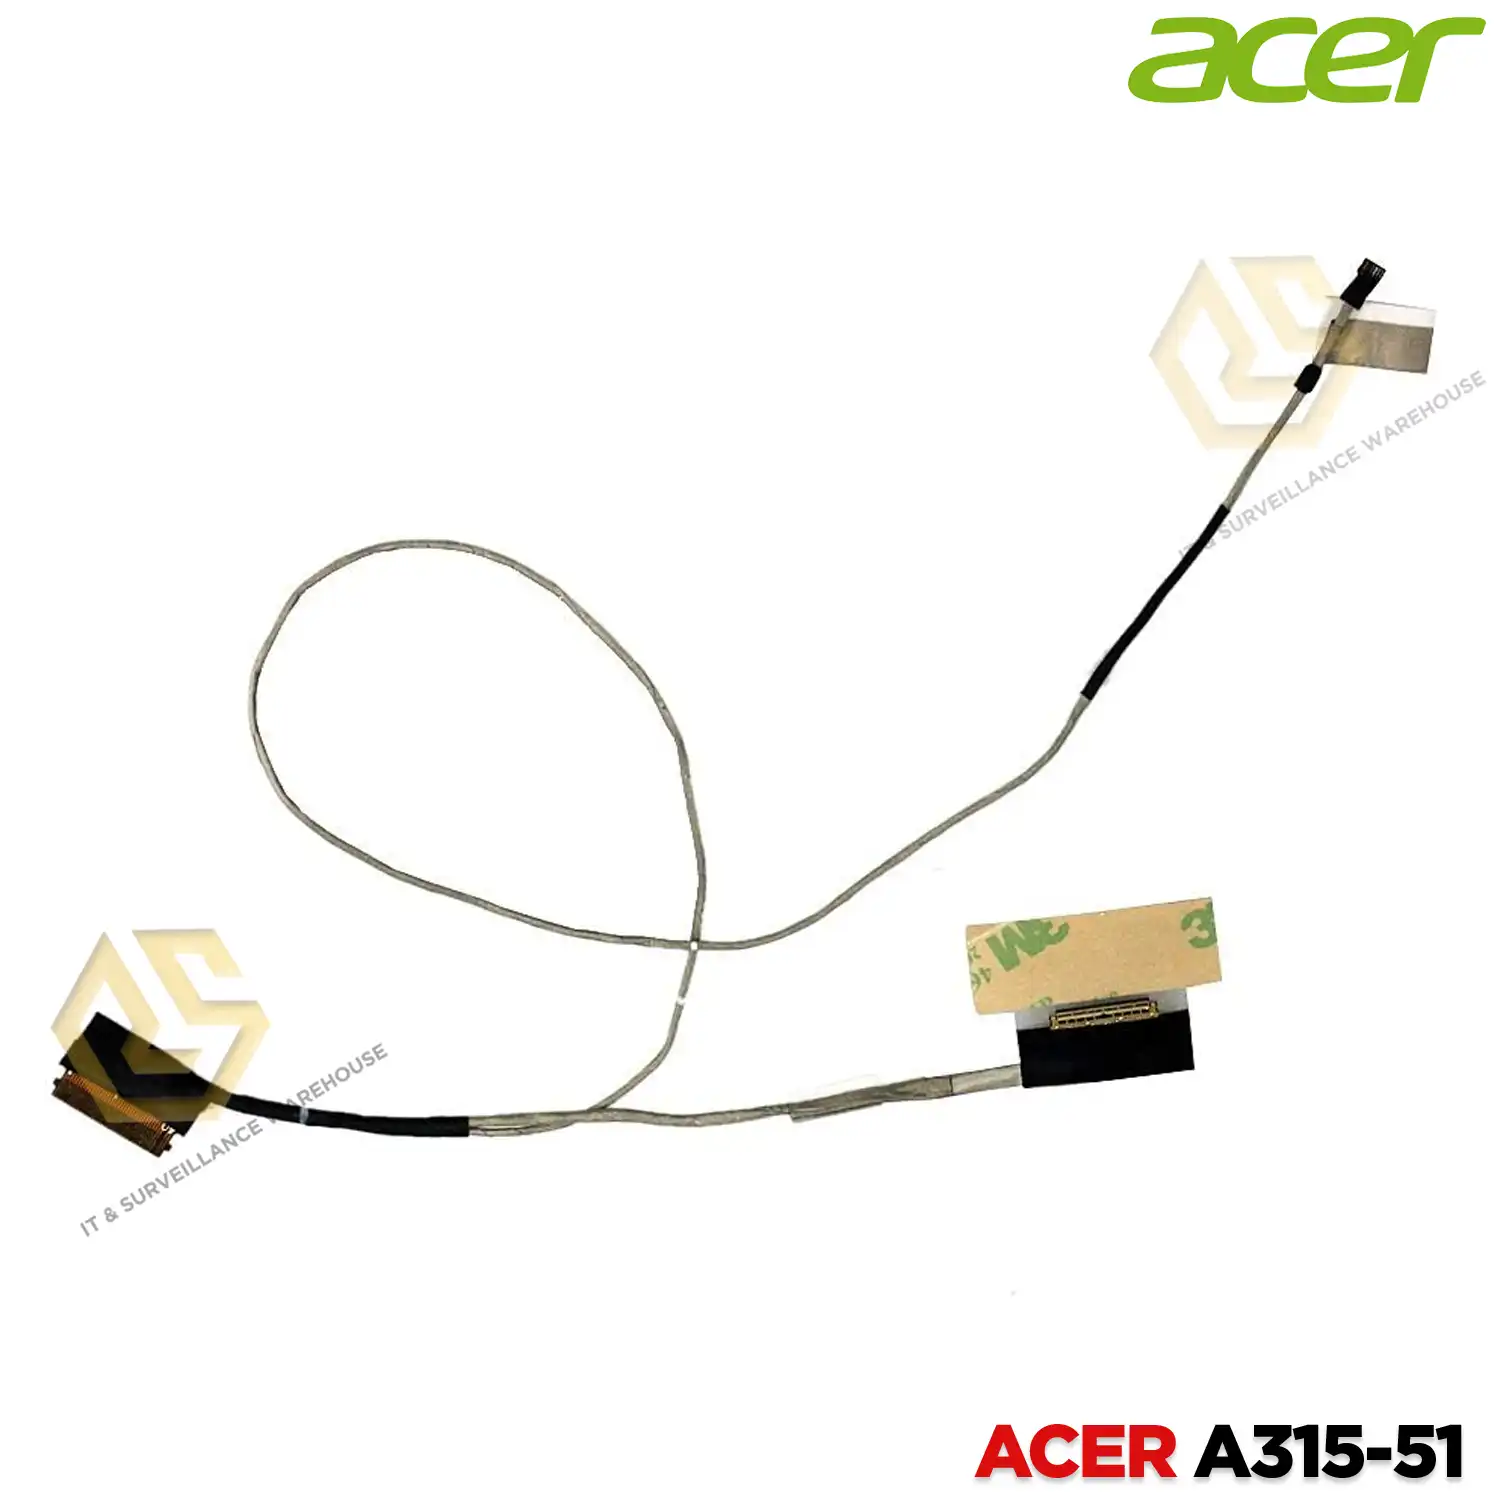 DISPLAY CABLE ACER A315-21| A315-31|A315-51|A315-52